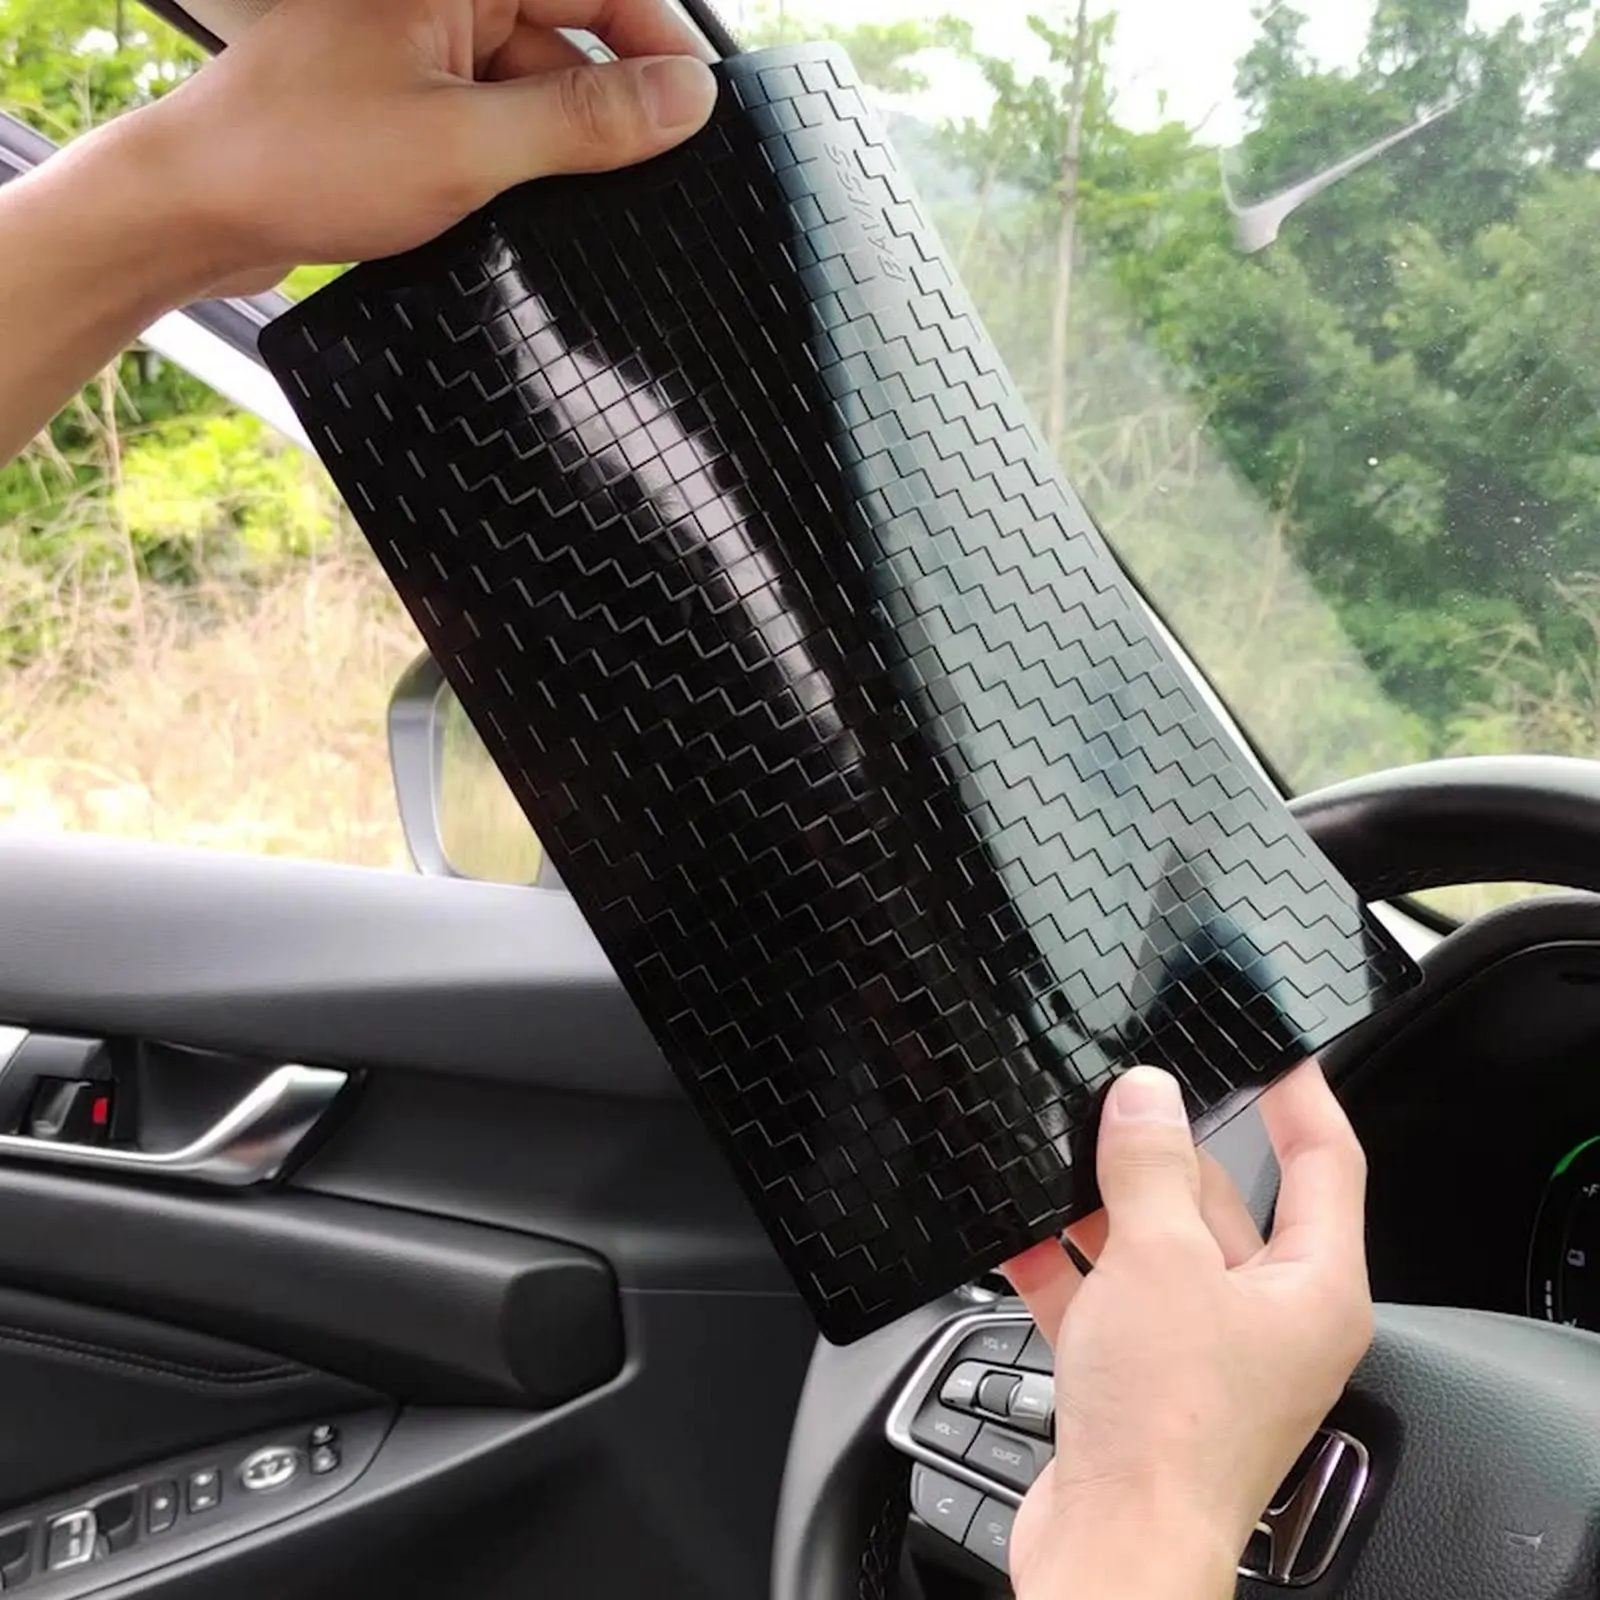 

Nano PU Extra Large Sticky Anti-Slip Pad 11 x 7 Inch Max Car Dashboard Anti Slide Mats Adhesive Pads for Cell Phone Temperature